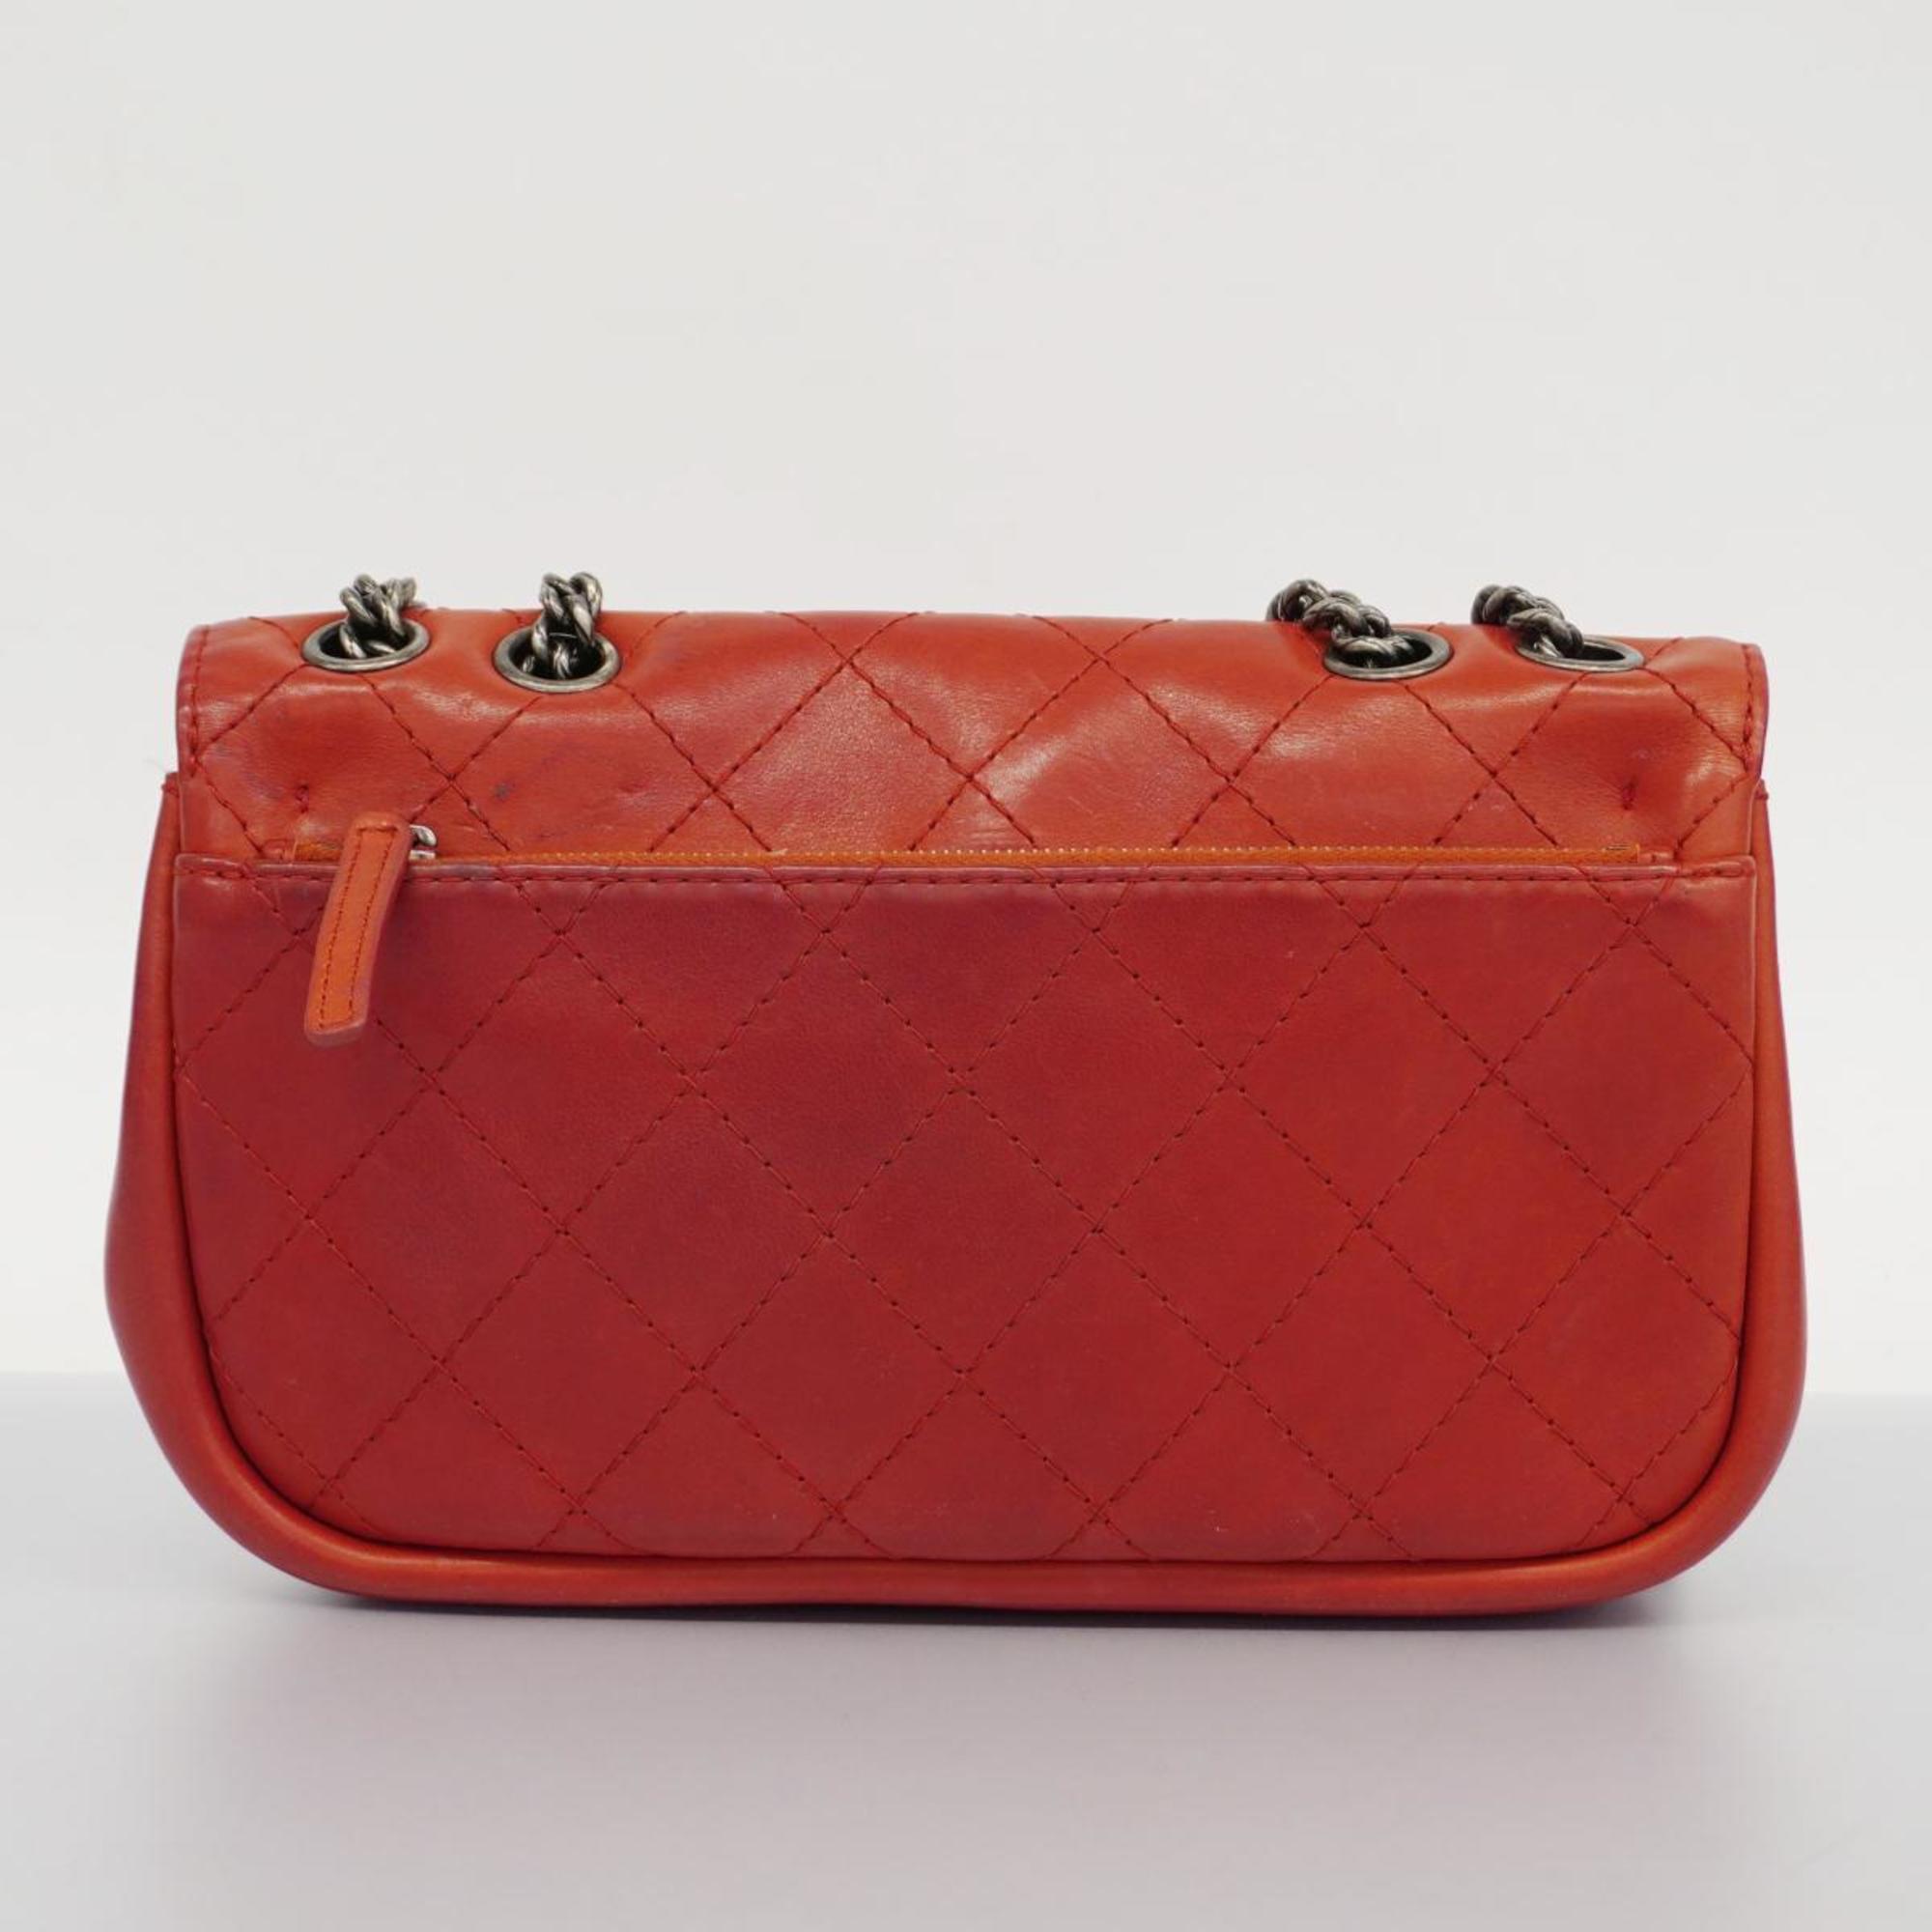 Chanel Shoulder Bag Boy W Chain Leather Red Women's